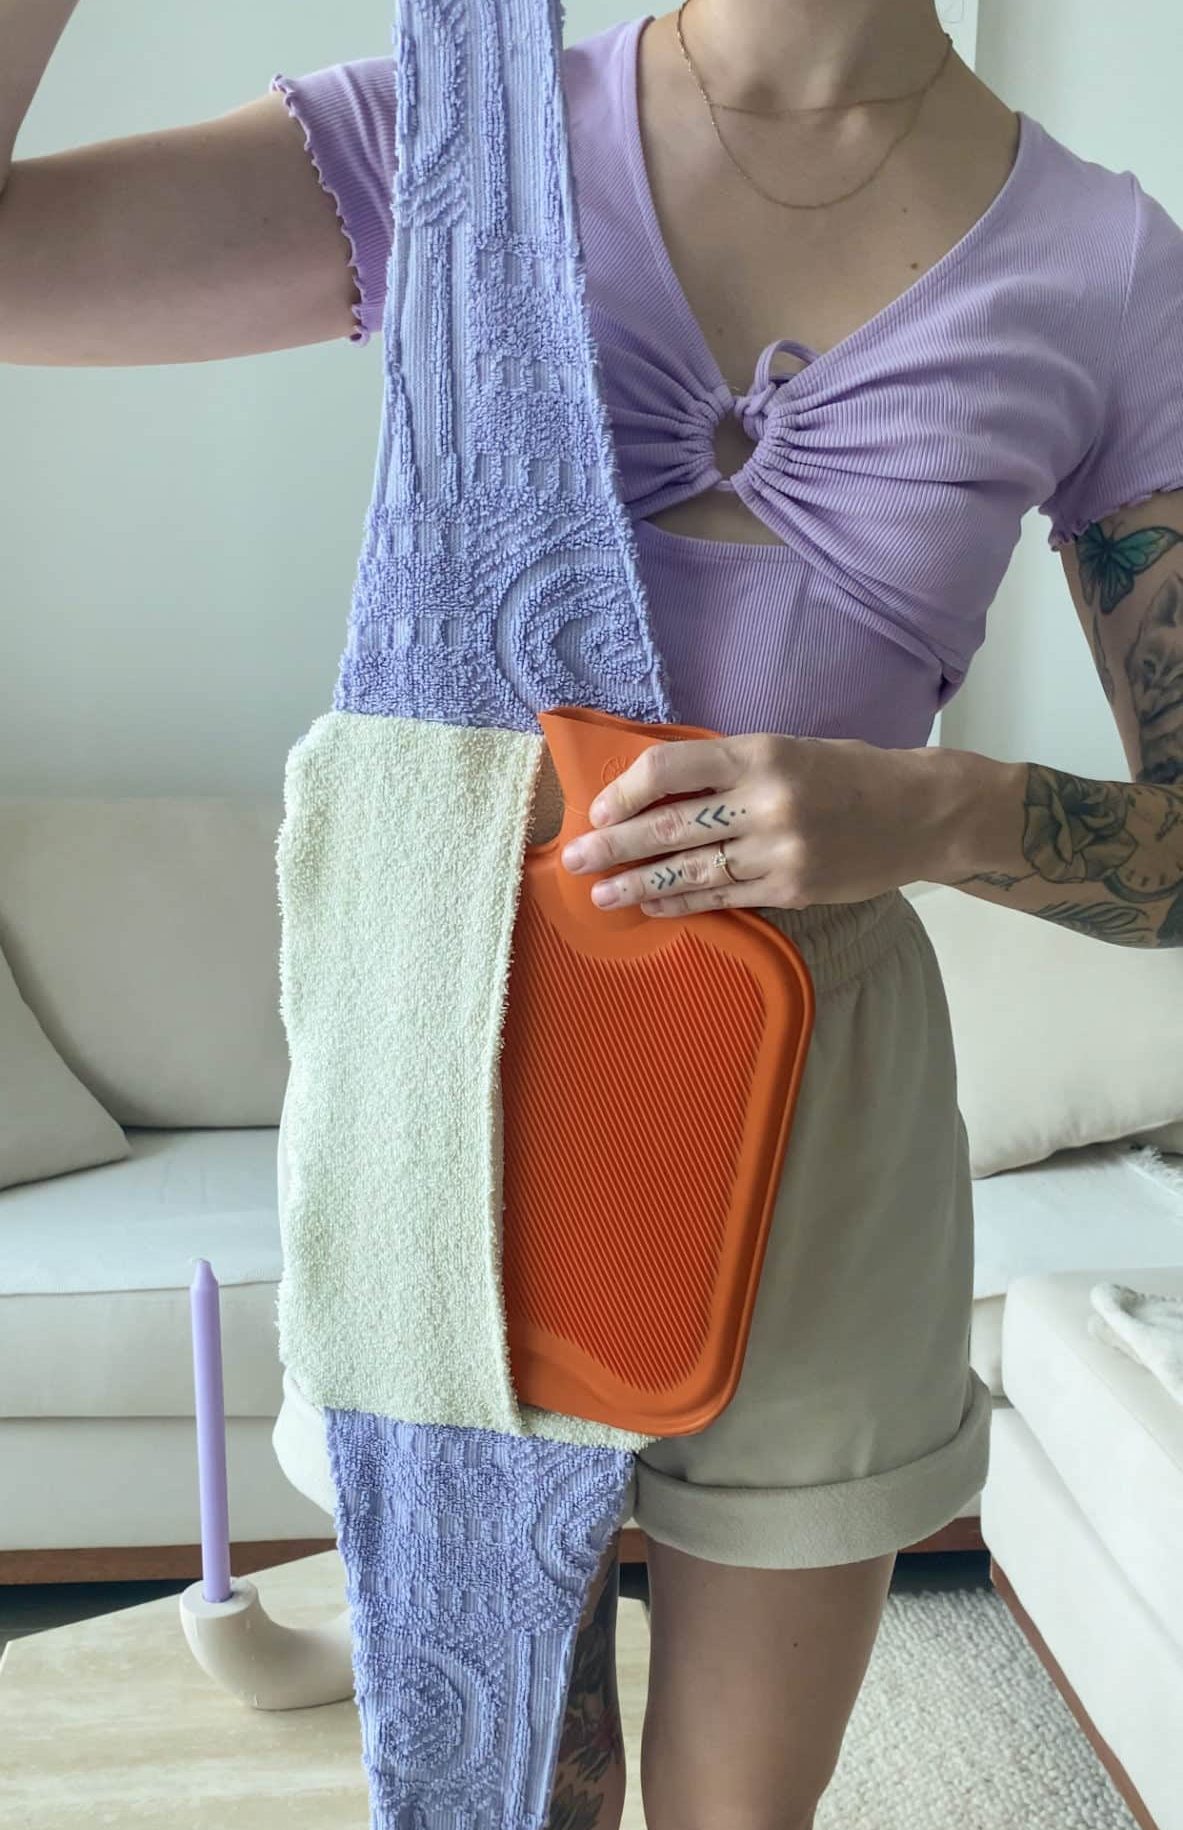 How to Make Hot Water Bottle Cover / Easy Sew Tutorial for Beginners 